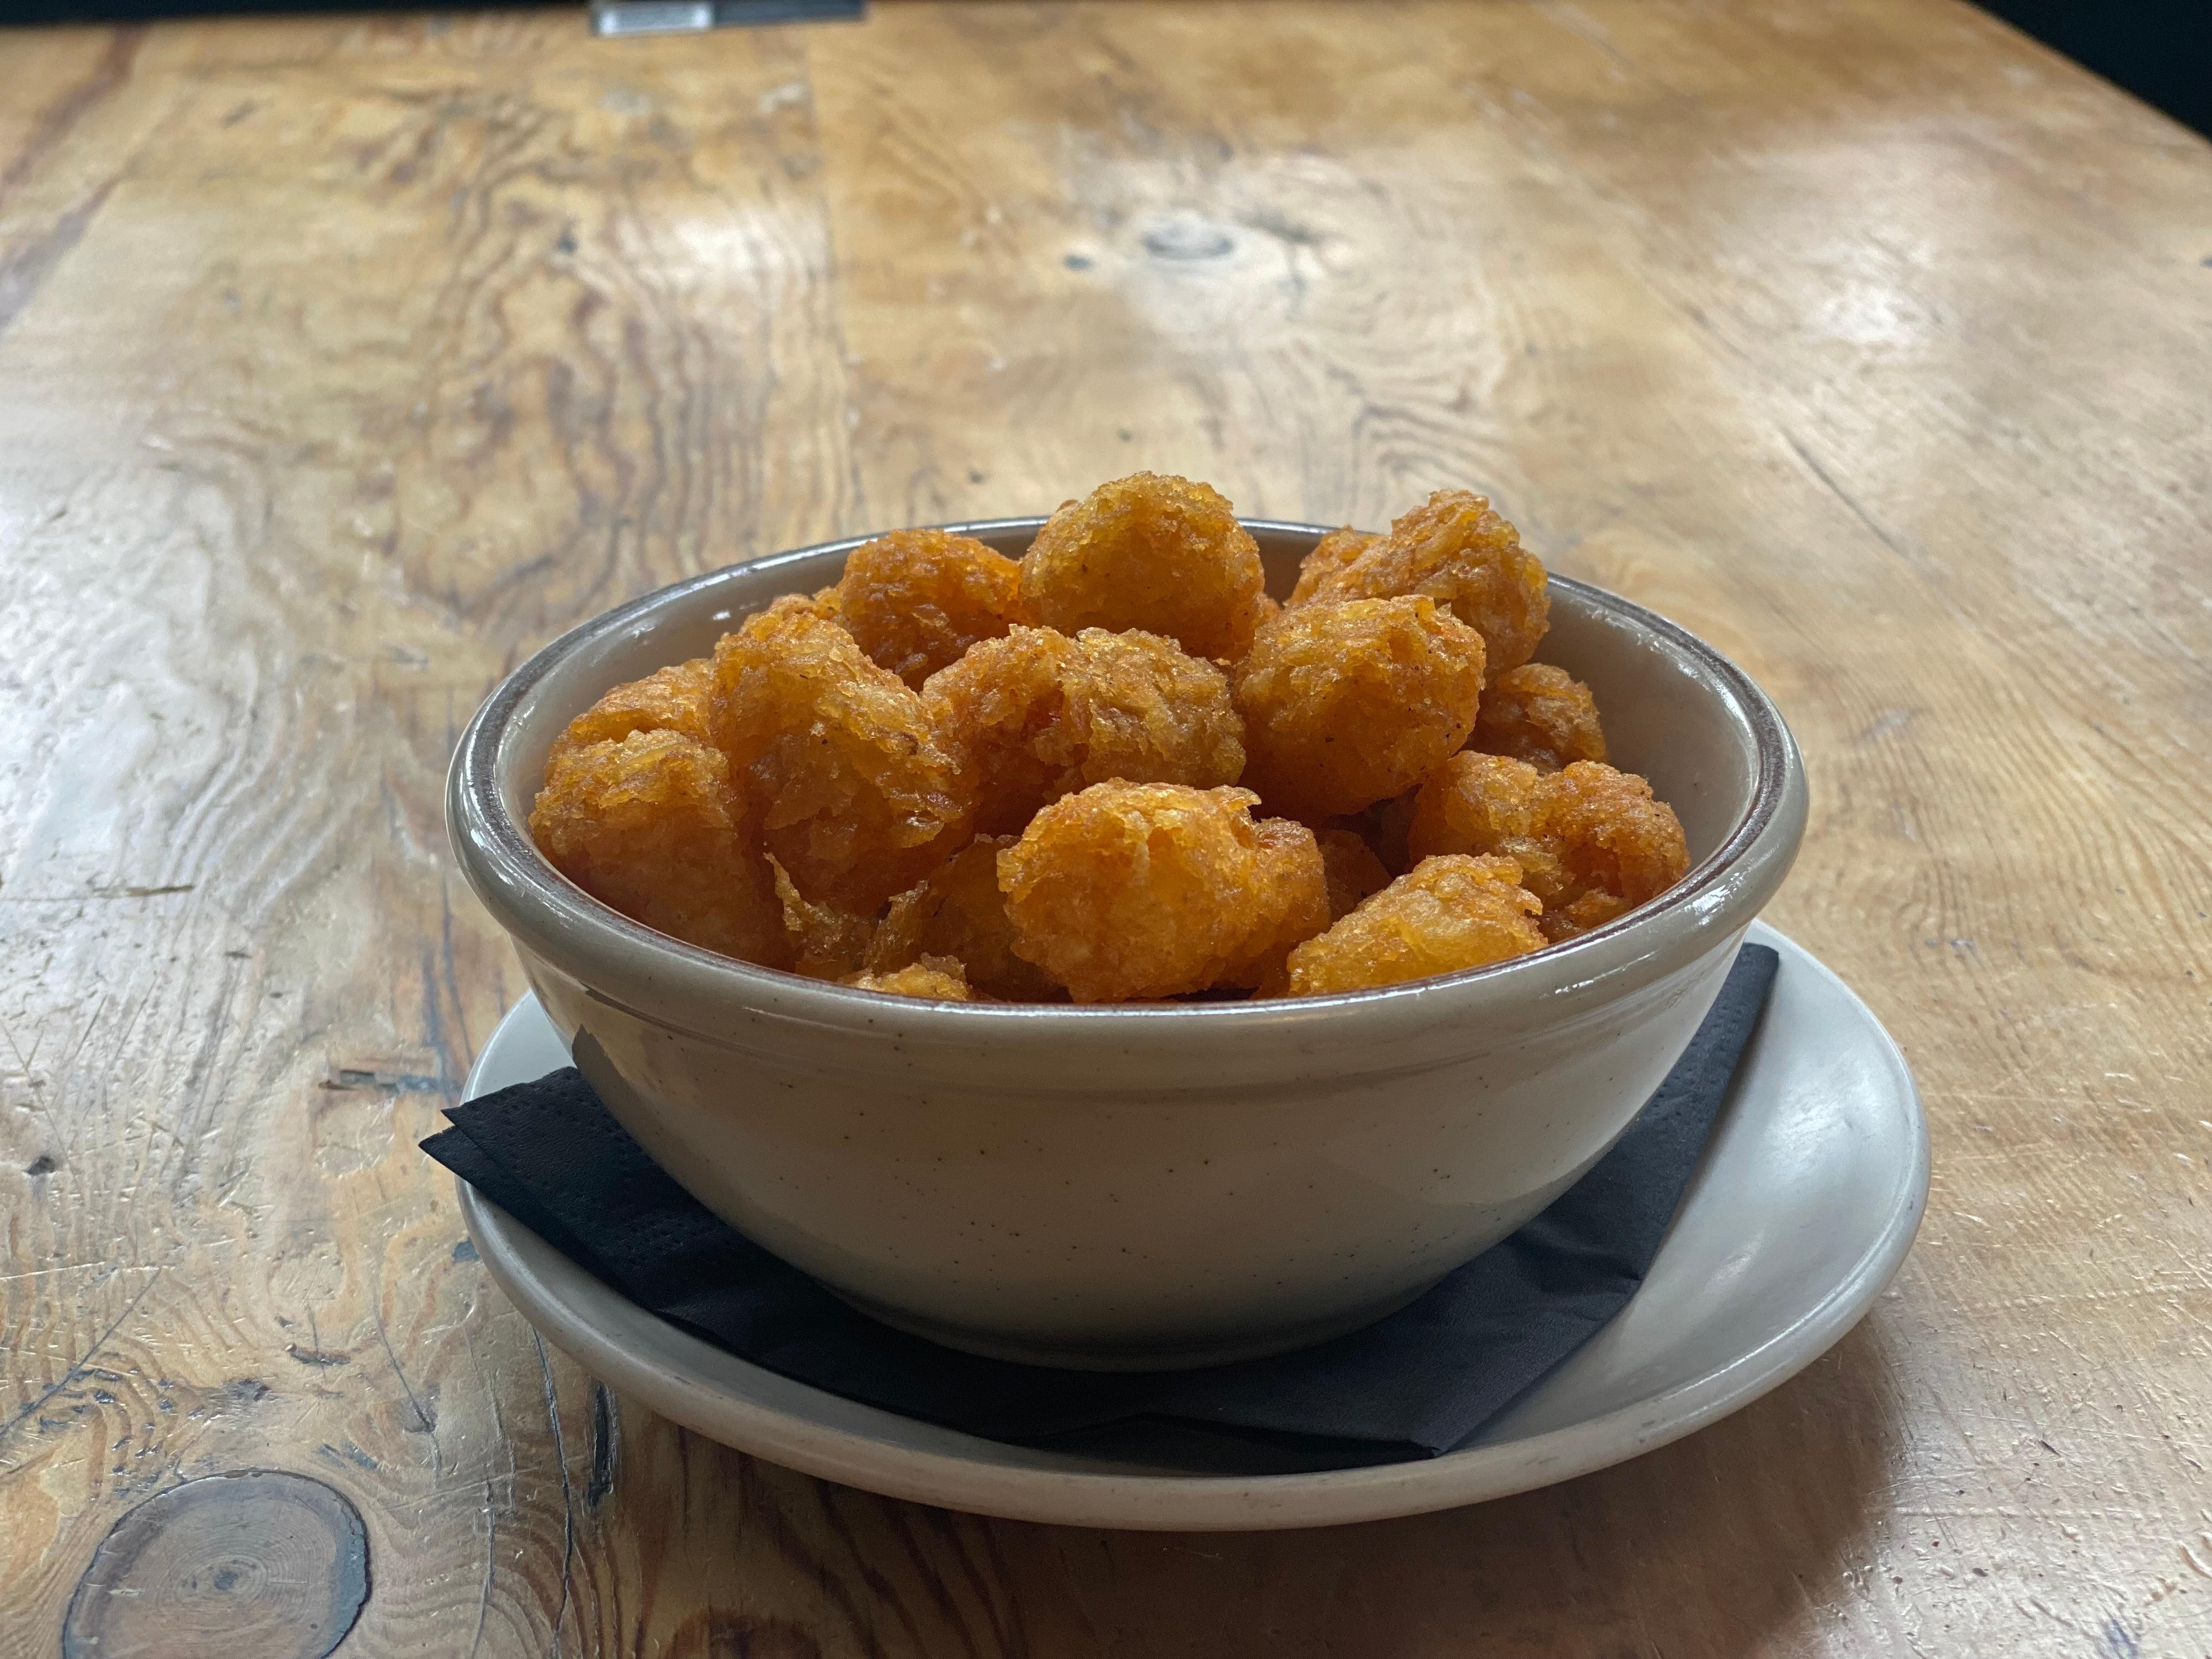 Side of Tater Tots